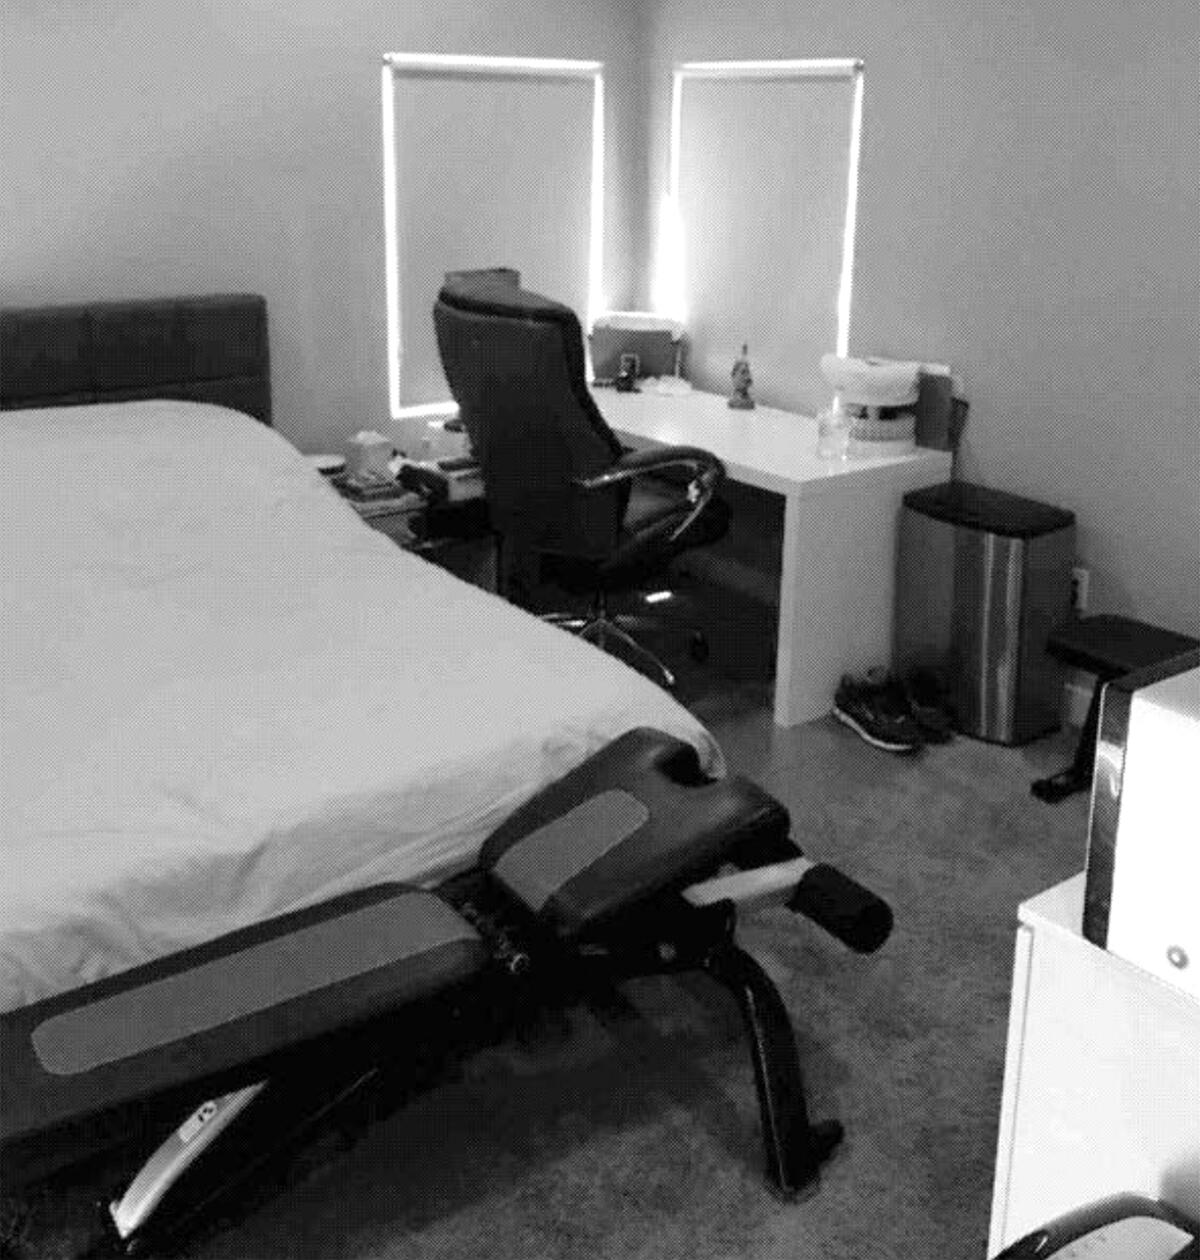 A room with a bed, exercise equipment and a desk with shades pulled down on two windows.